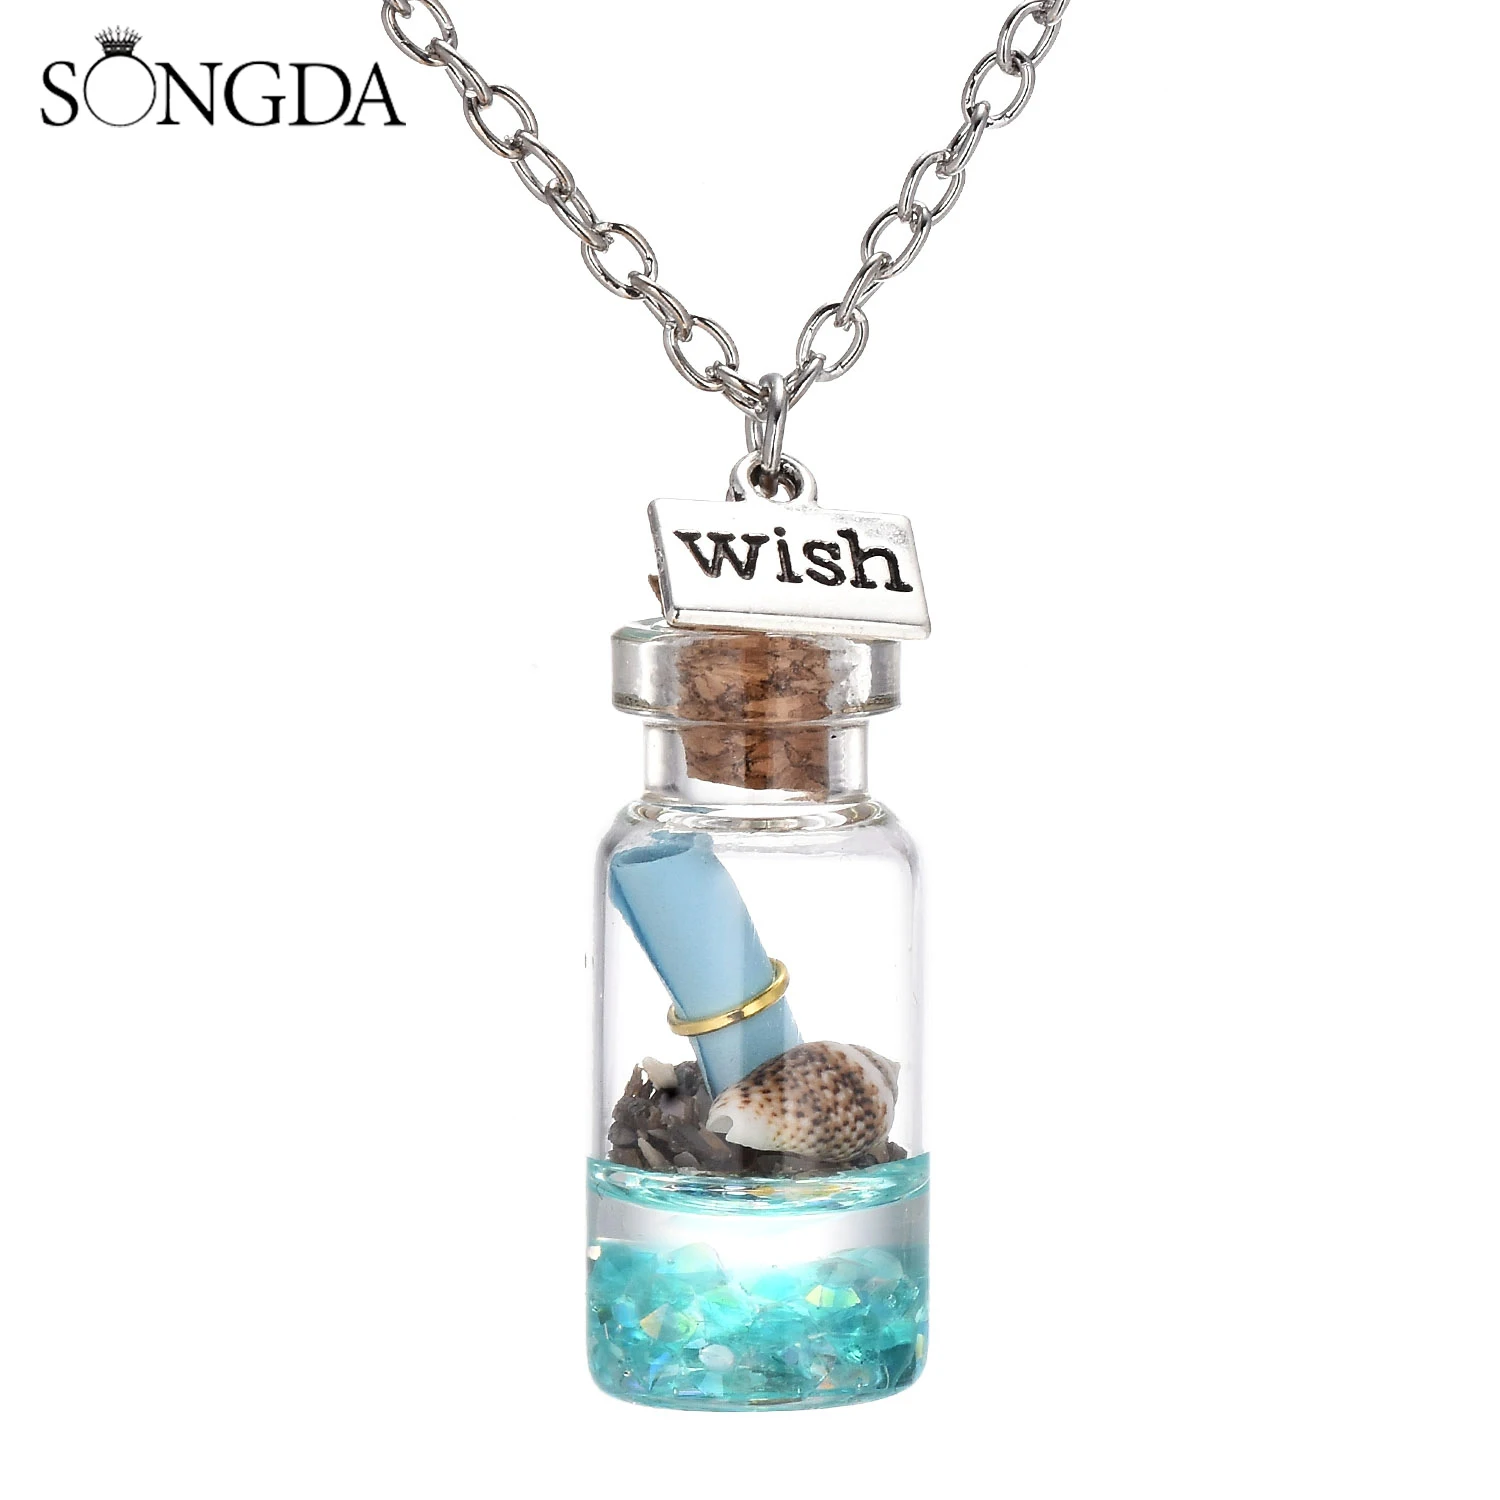 Make A Wish Drift Bottle Necklace Romantic Mermaid Tears Shells Vial Pendant Table Wish Letters Necklace Gift for Friends